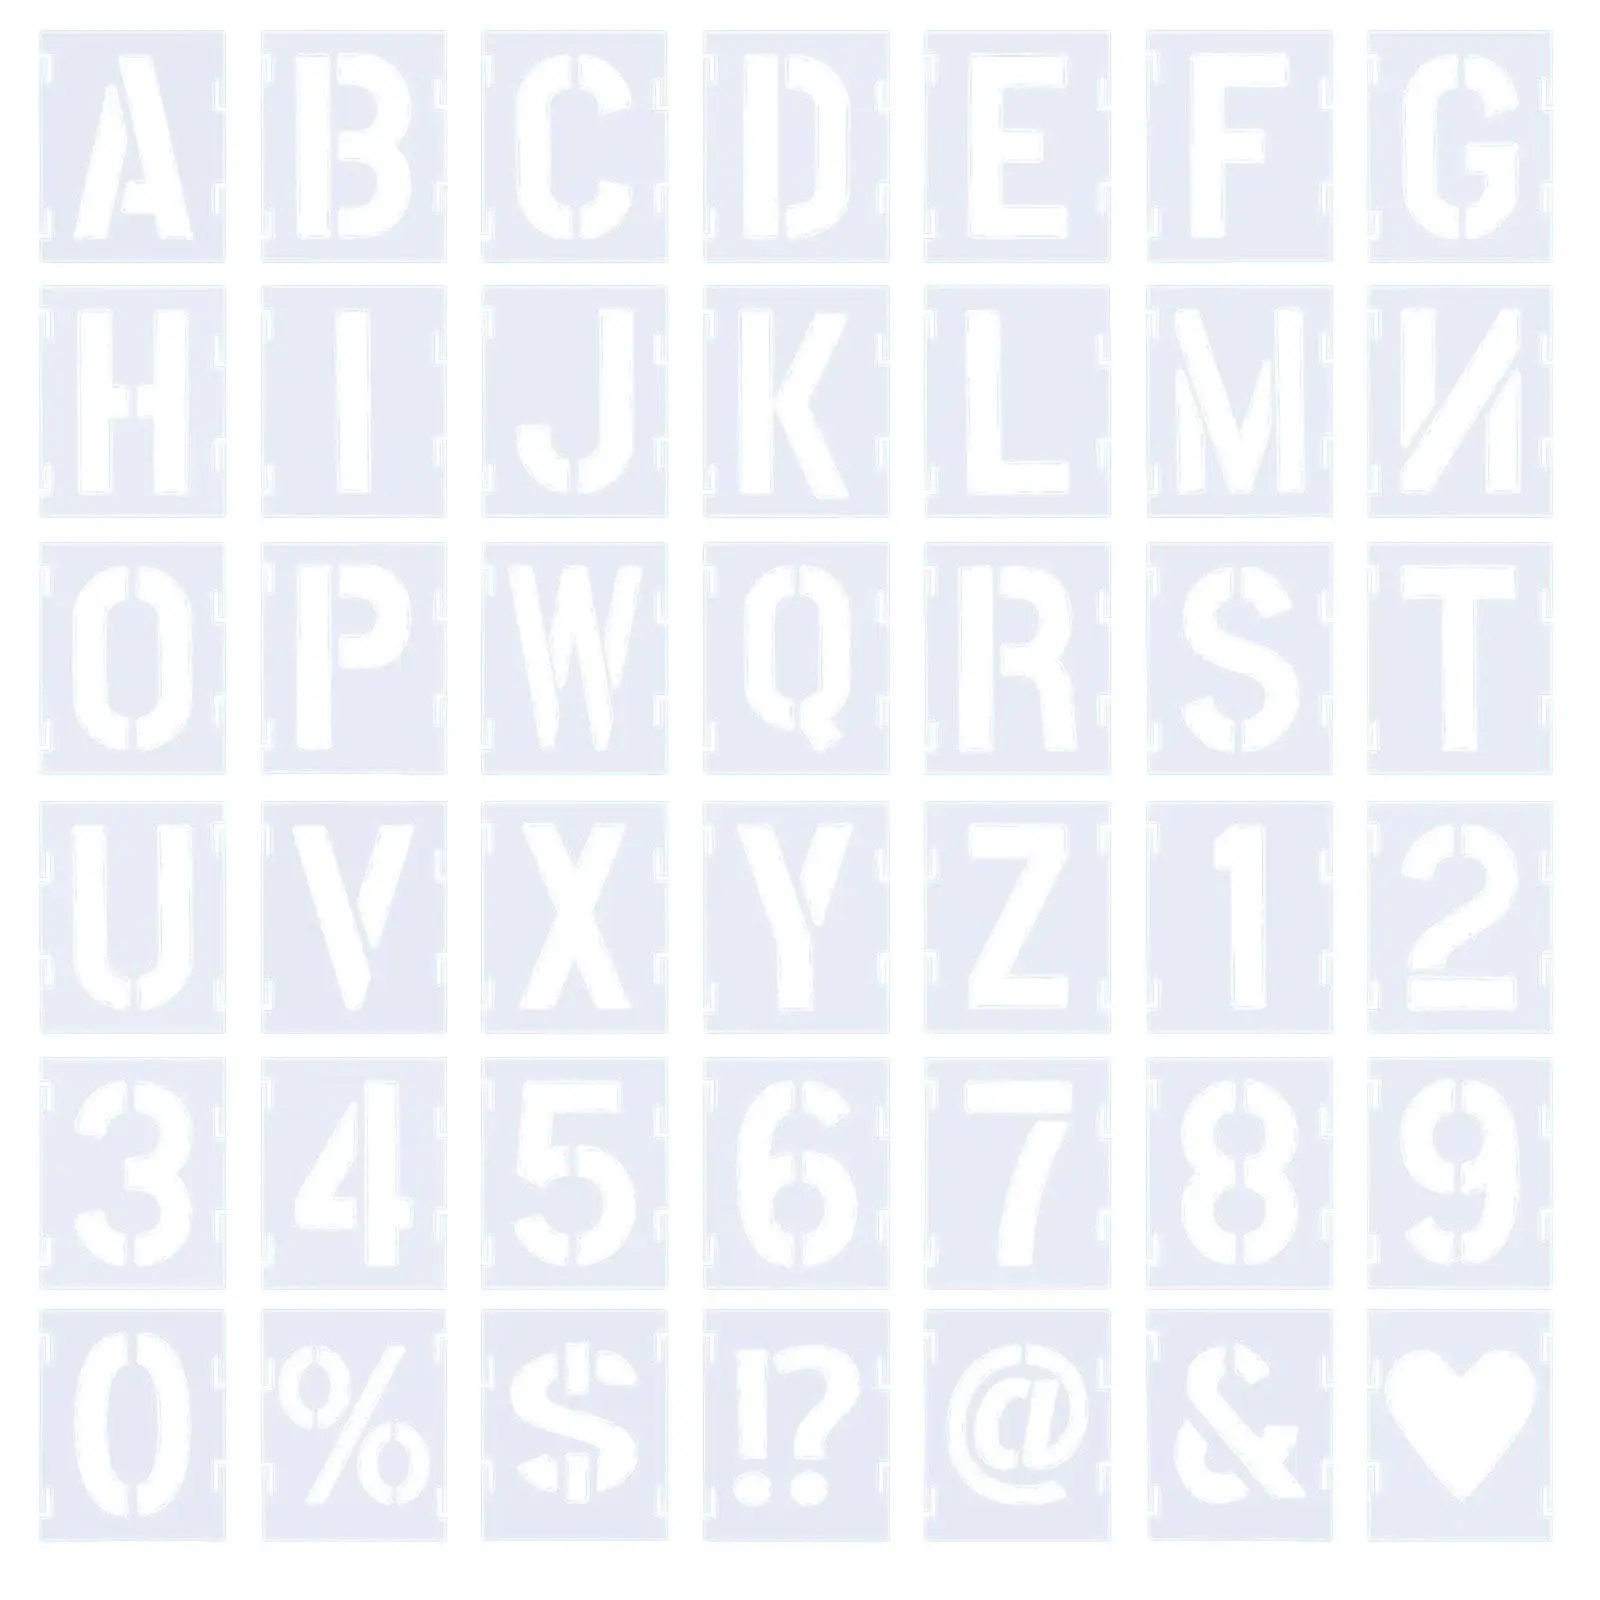 Letter Stencils 2 inch Symbol Numbers Spray Painting Painting Stencils Craft Stencils for Painting on Fabric Glass Canvas